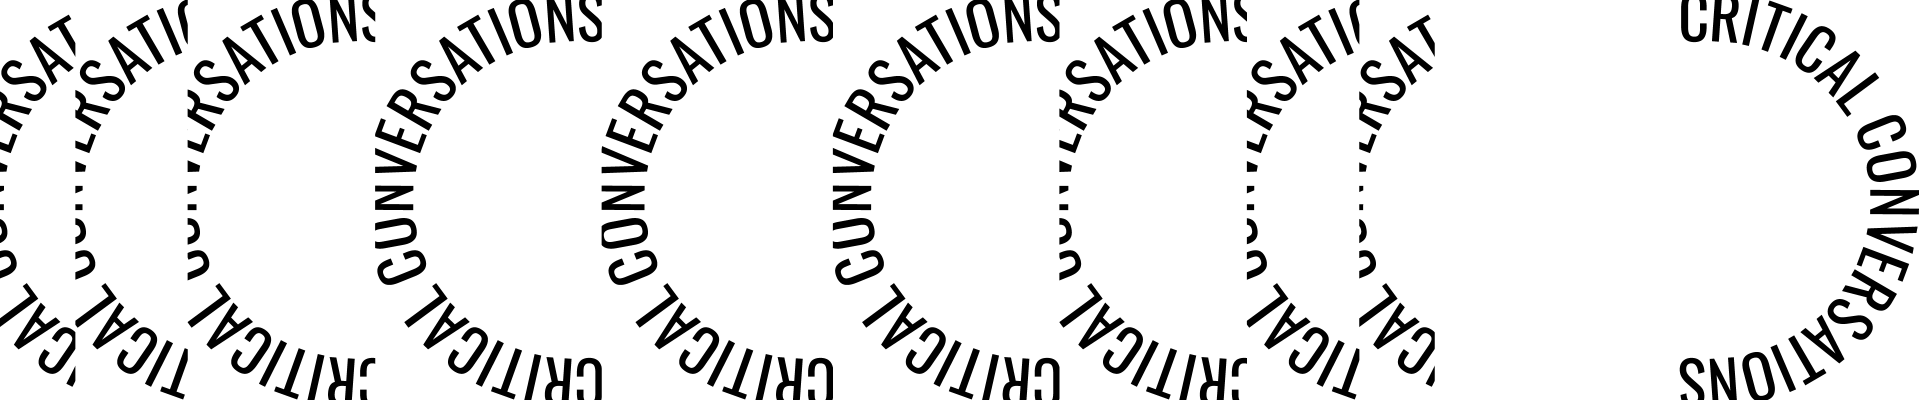 Critical Conversations logo in black and white